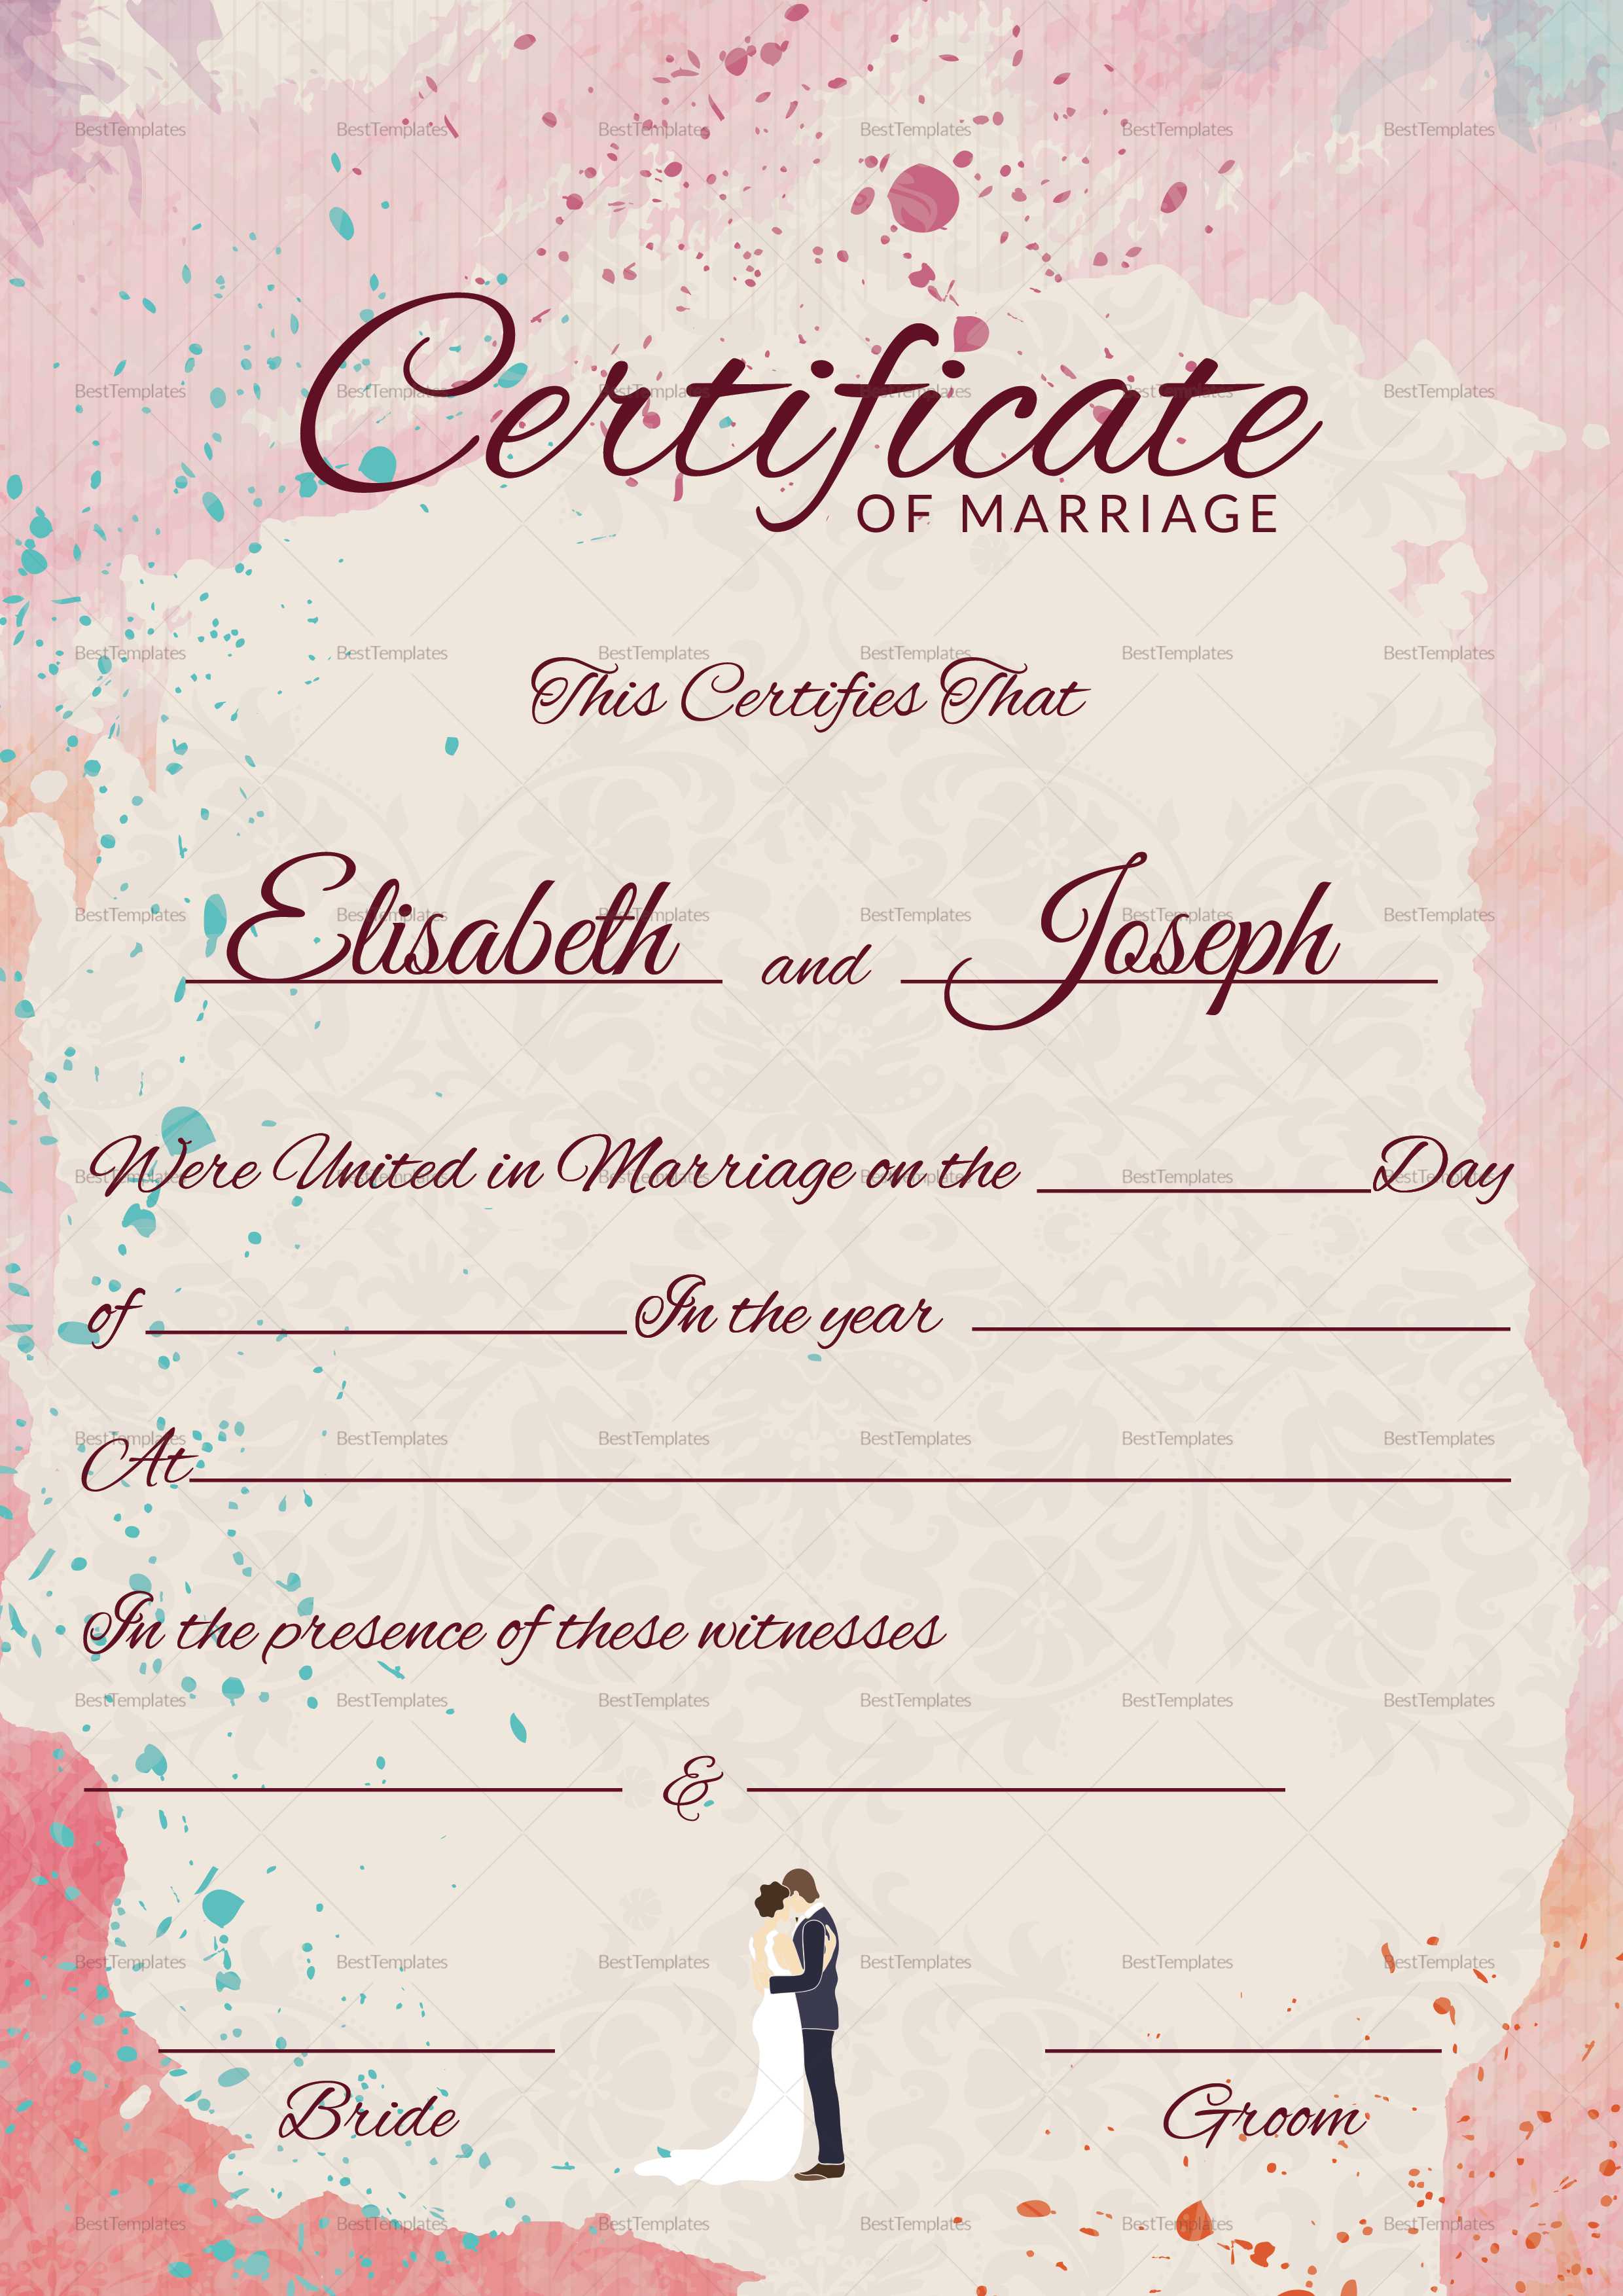 Christian Marriage Certificate Template Within Certificate Of Marriage Template